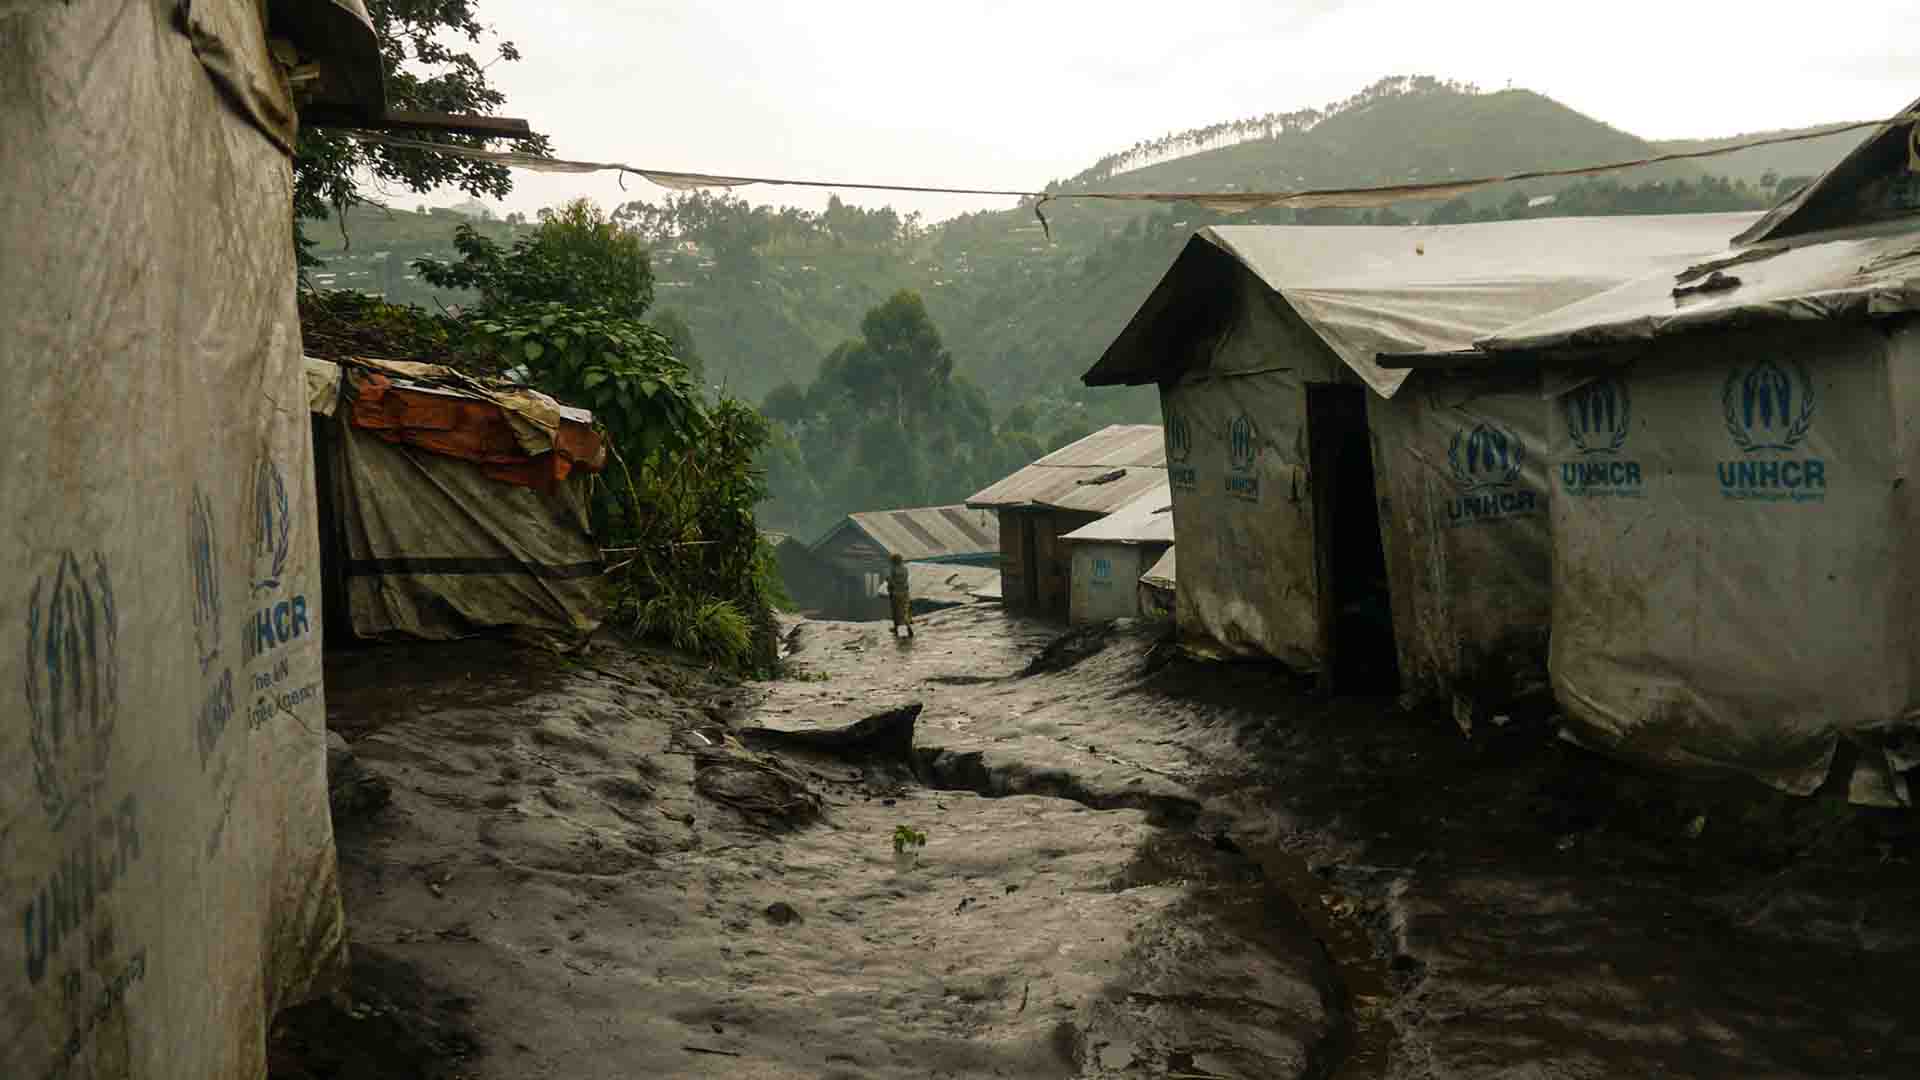 This is a picture of Kalinga Camp located in North Kivu in the DRC. It looks like it recently rained, the dirt street looks damp. Houses on either side of the road have tarps with UNHCR logos covering them.